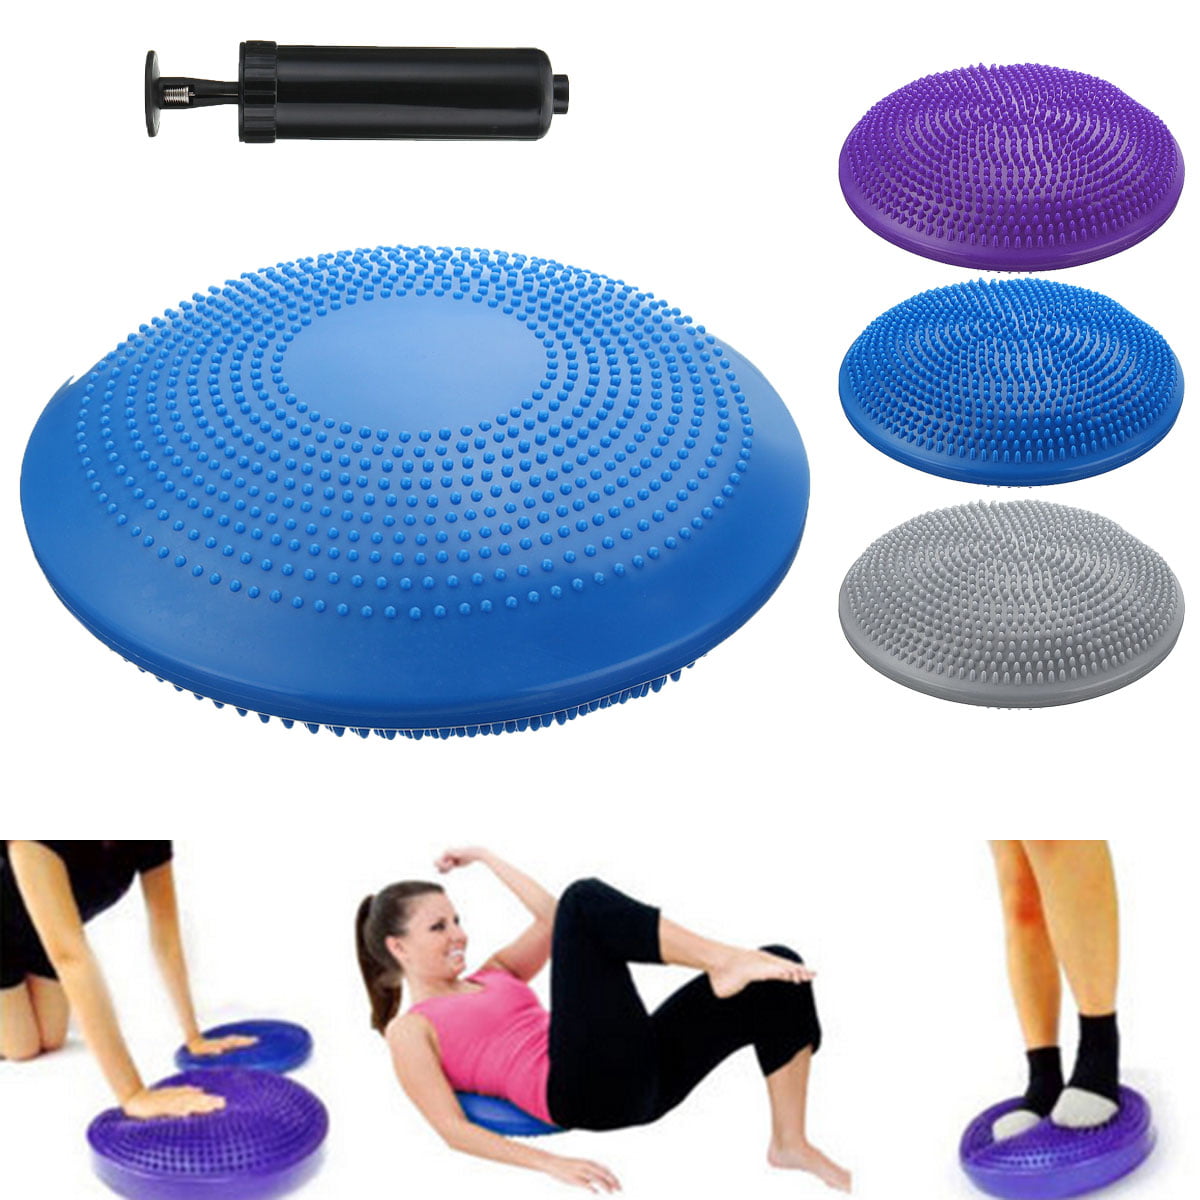 DREAM HORSE Inflatable Yoga Balance Mat Thickened Explosion-Proof Yoga Balance Ball Balance Disc Massage Cushion Balance Training Device Suitable for Home or Office for Fitness and Exercise 